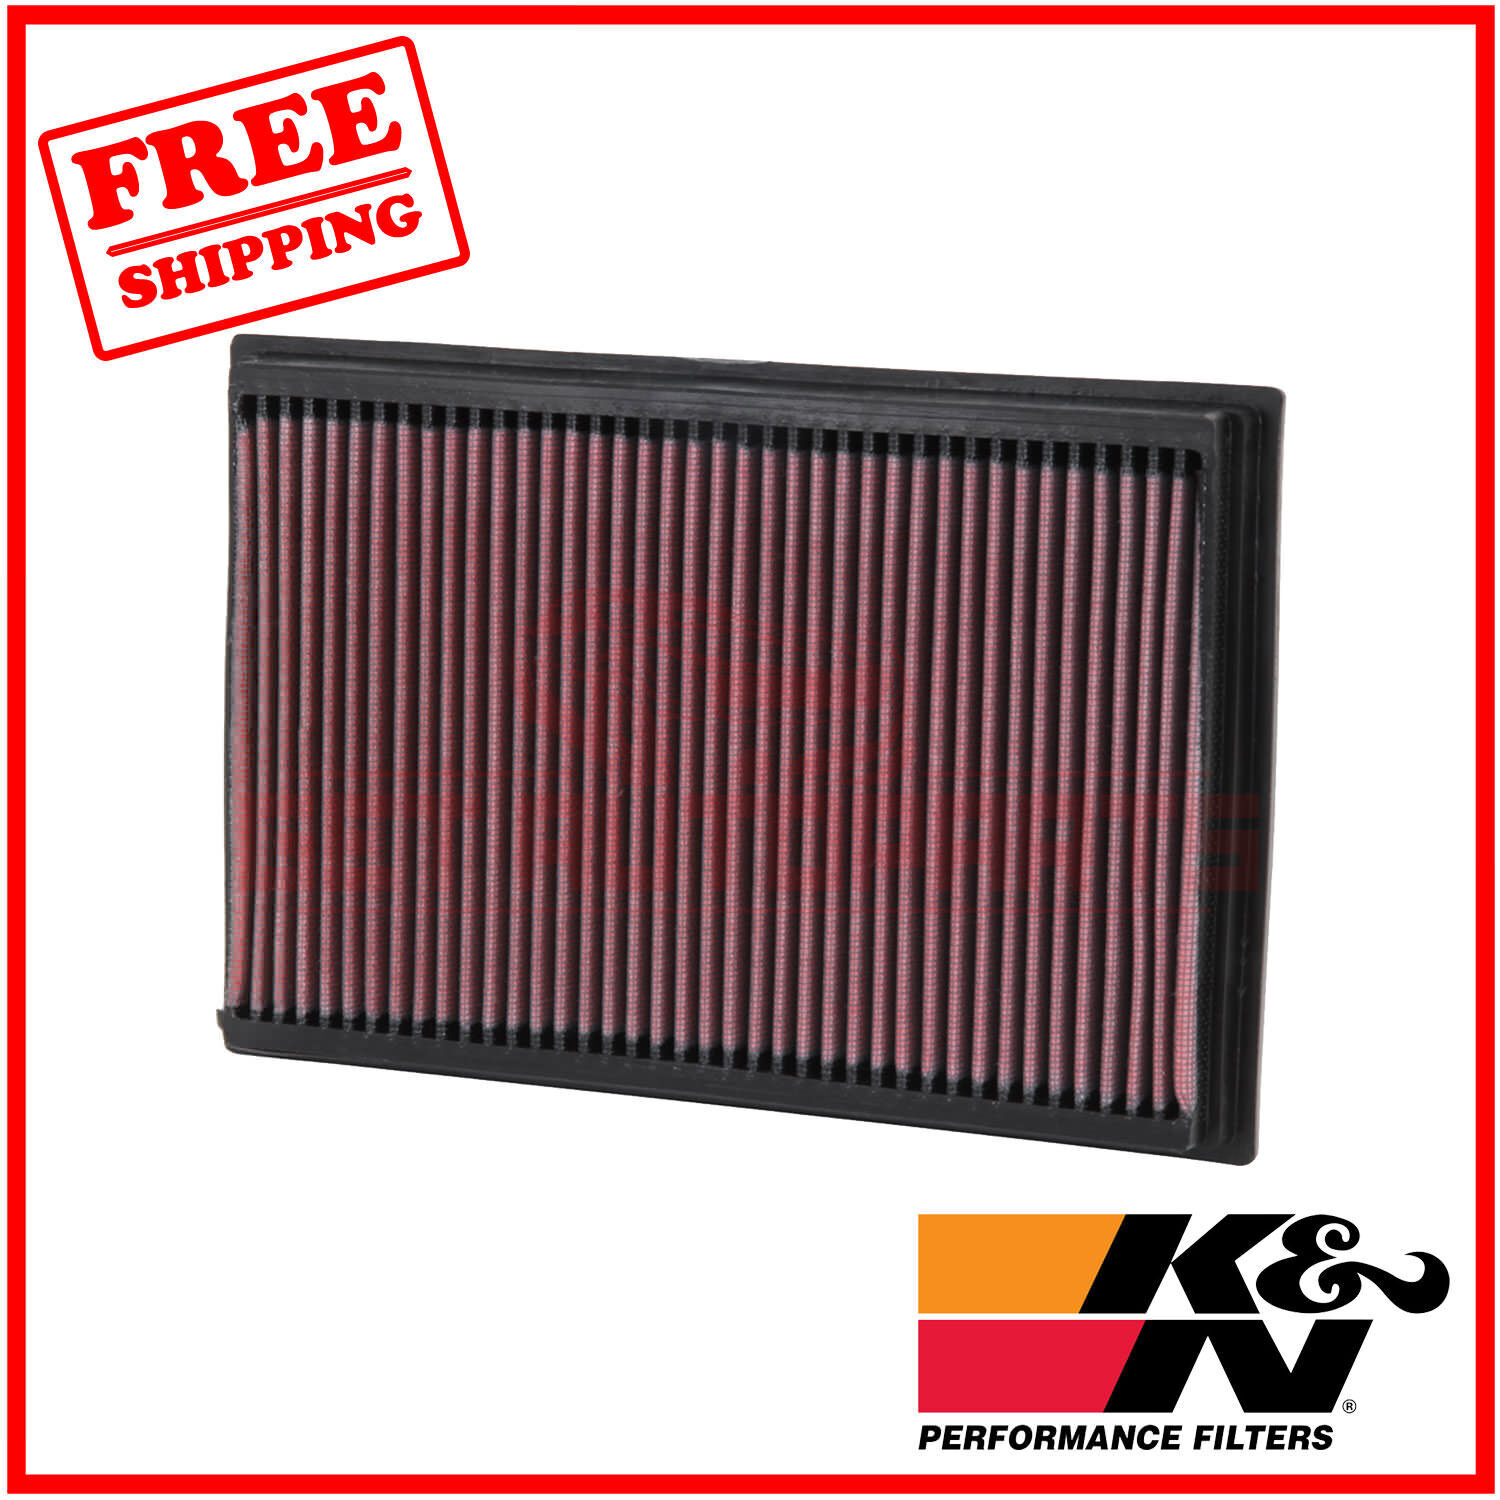 K&N Replacement Air Filter for Ford Crown Victoria 1992-2011